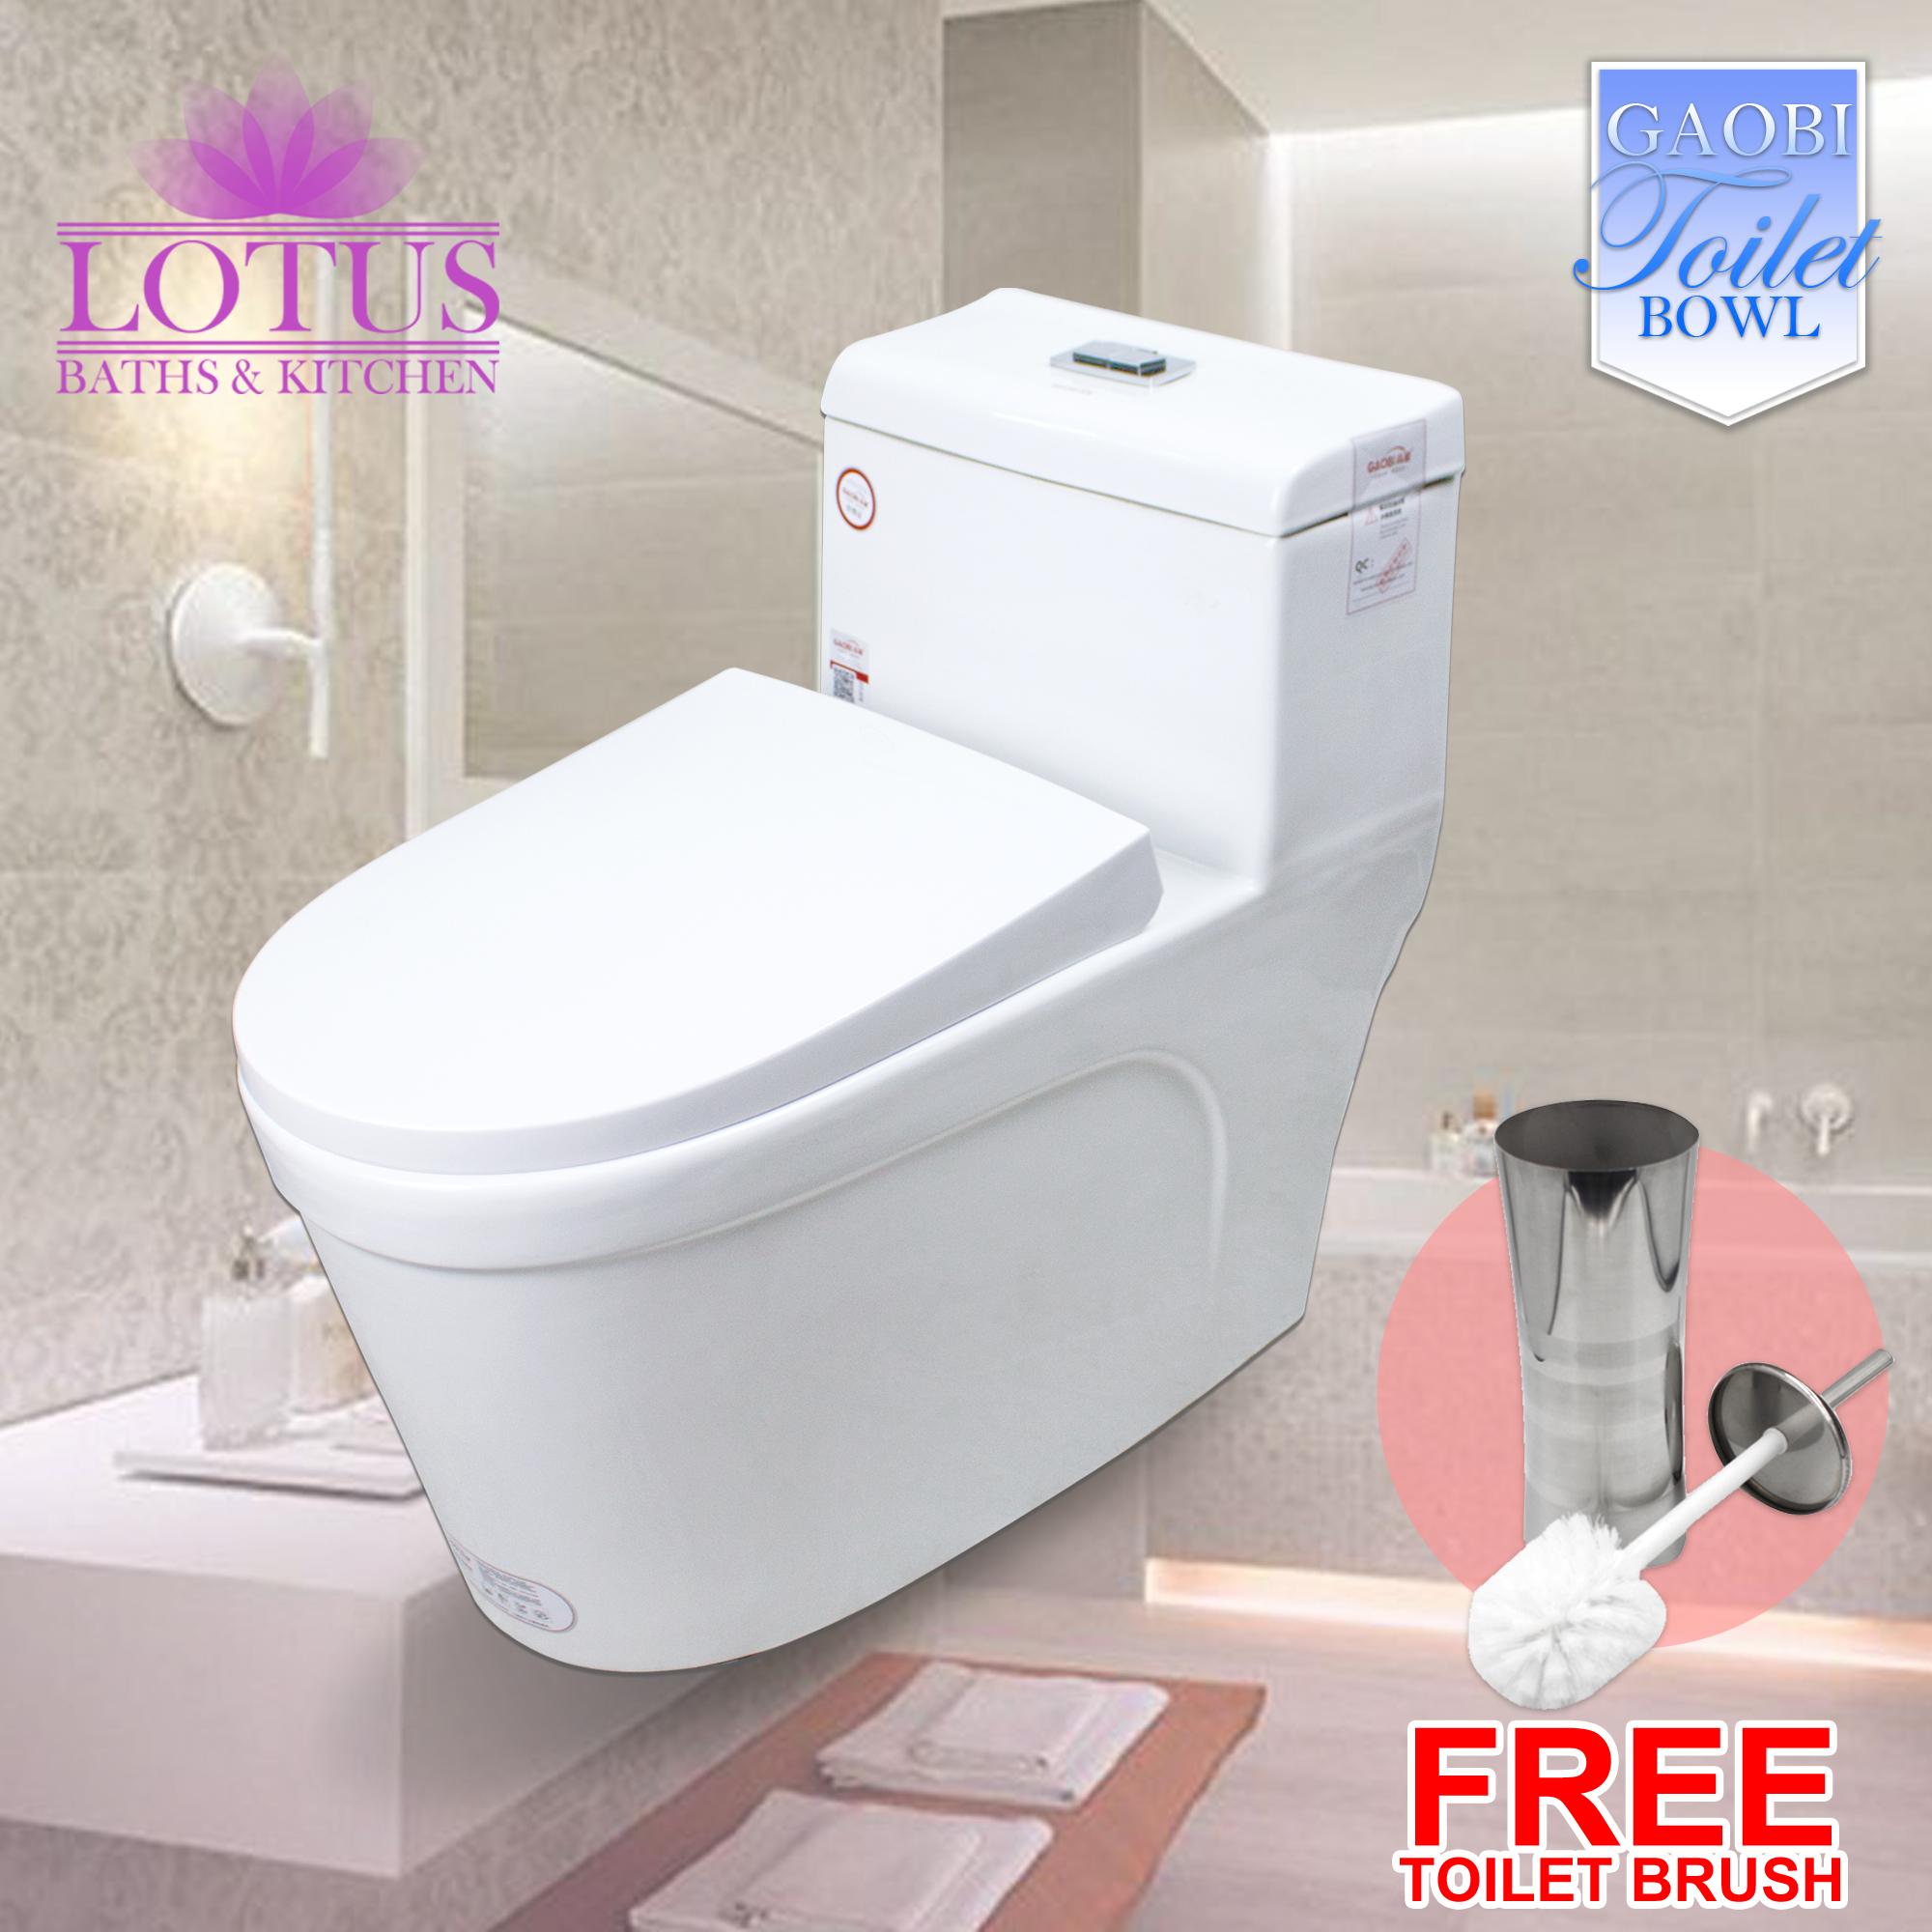 Water Closet Brands Philippines Image Of Bathroom And Closet